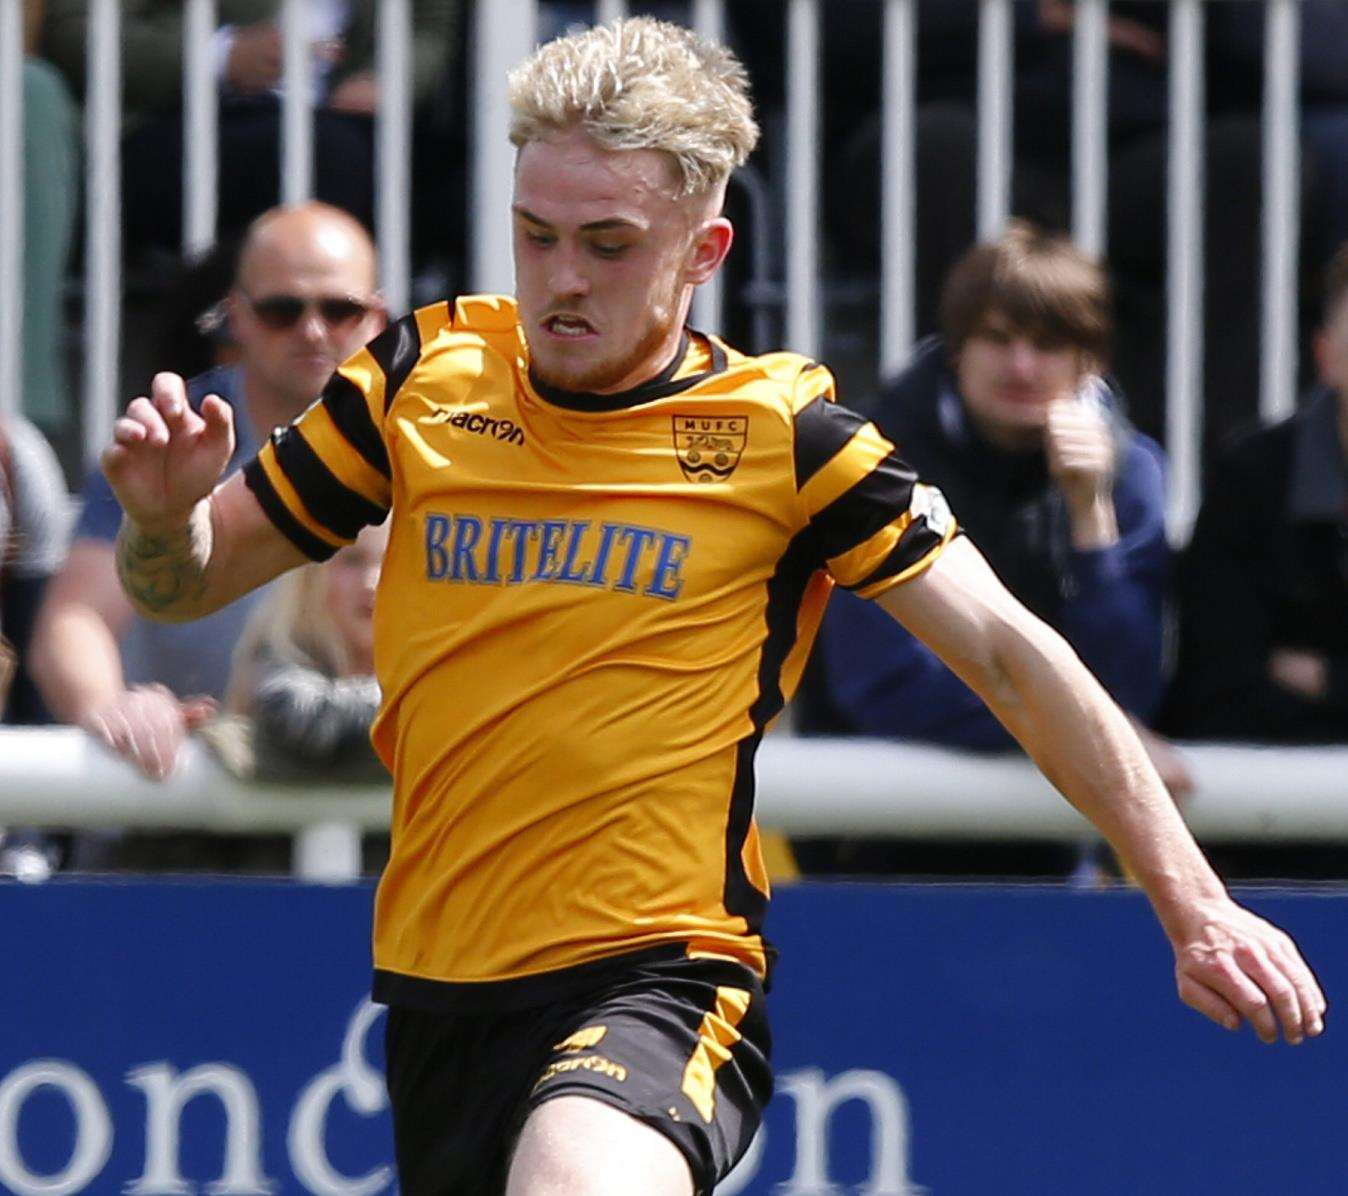 Bobby-Joe Taylor pictured playing for Maidstone Picture: Andy Jones